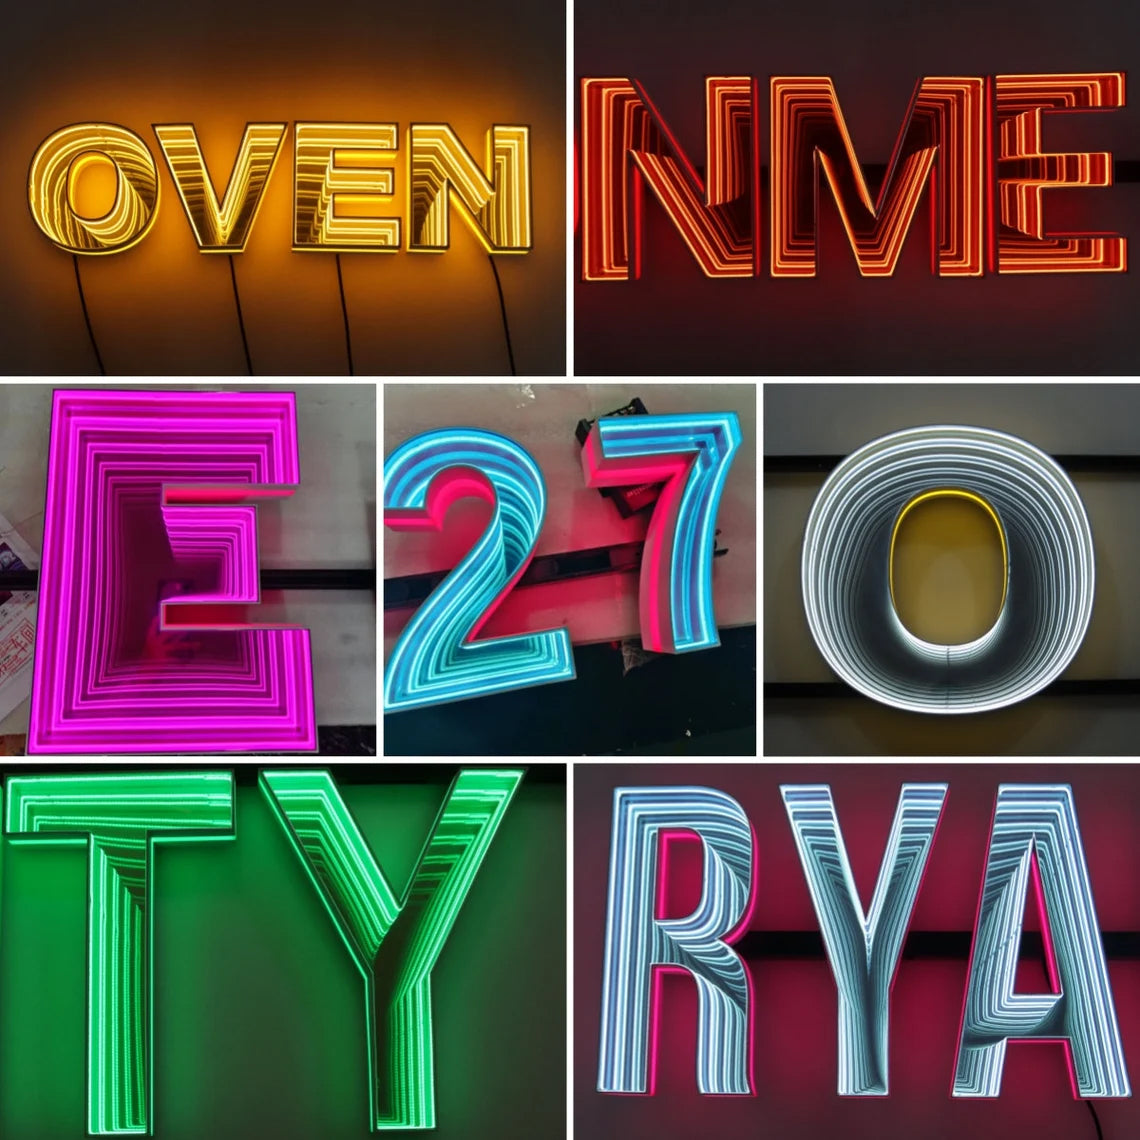 Custom 3D Infinity Mirror LED Light Sign - Personalized Magic Number Sign